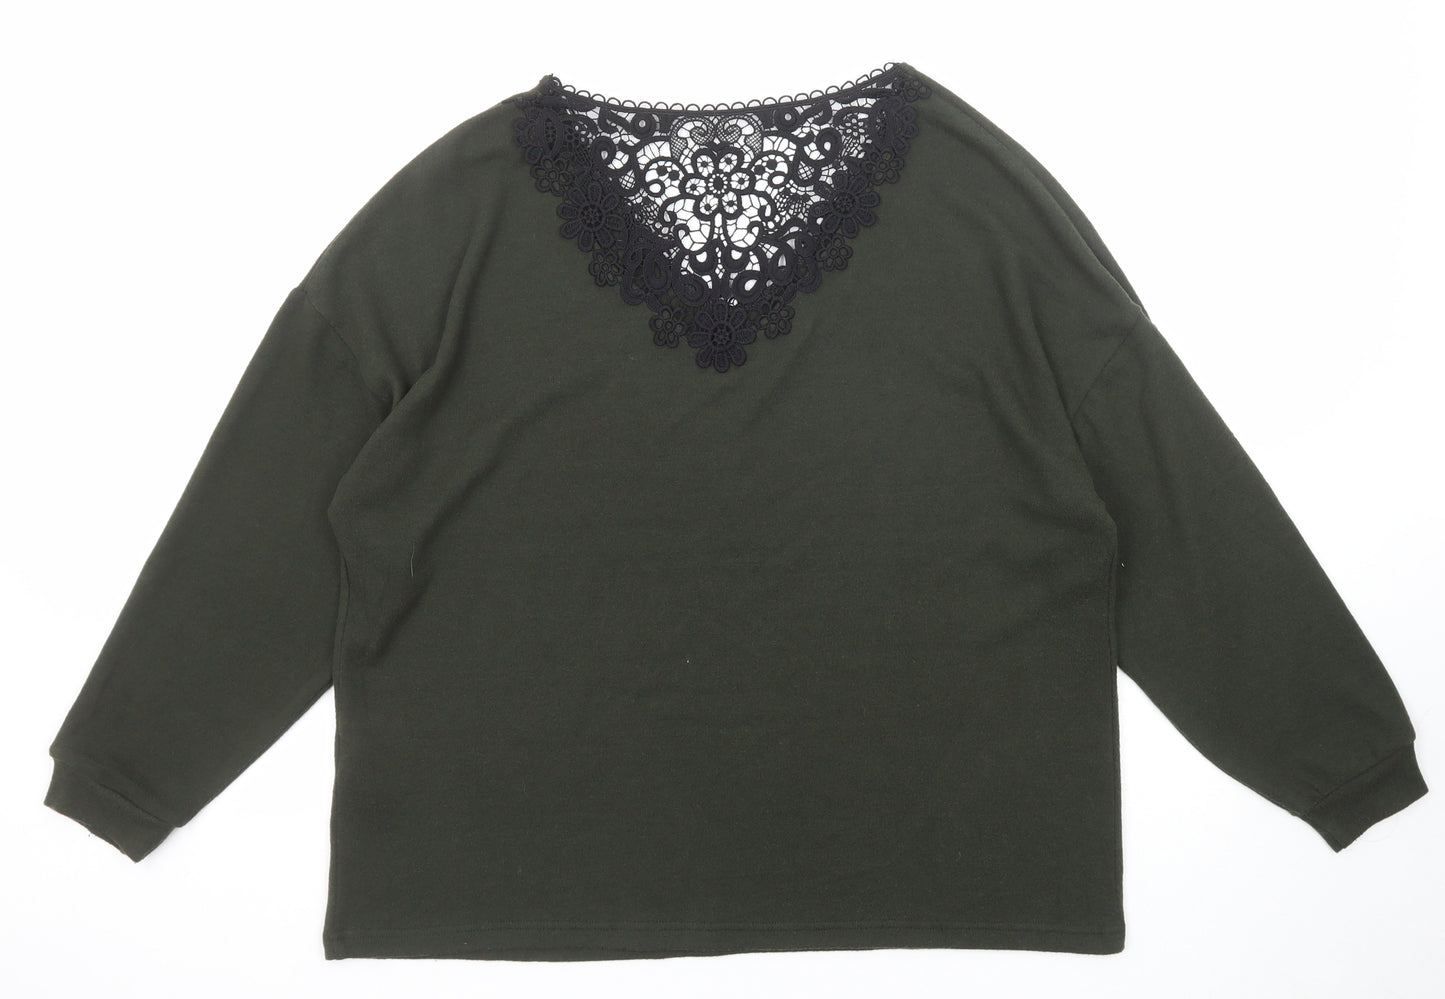 Dorothy Perkins Womens Green V-Neck Polyester Pullover Jumper Size 14 - Lace Detail